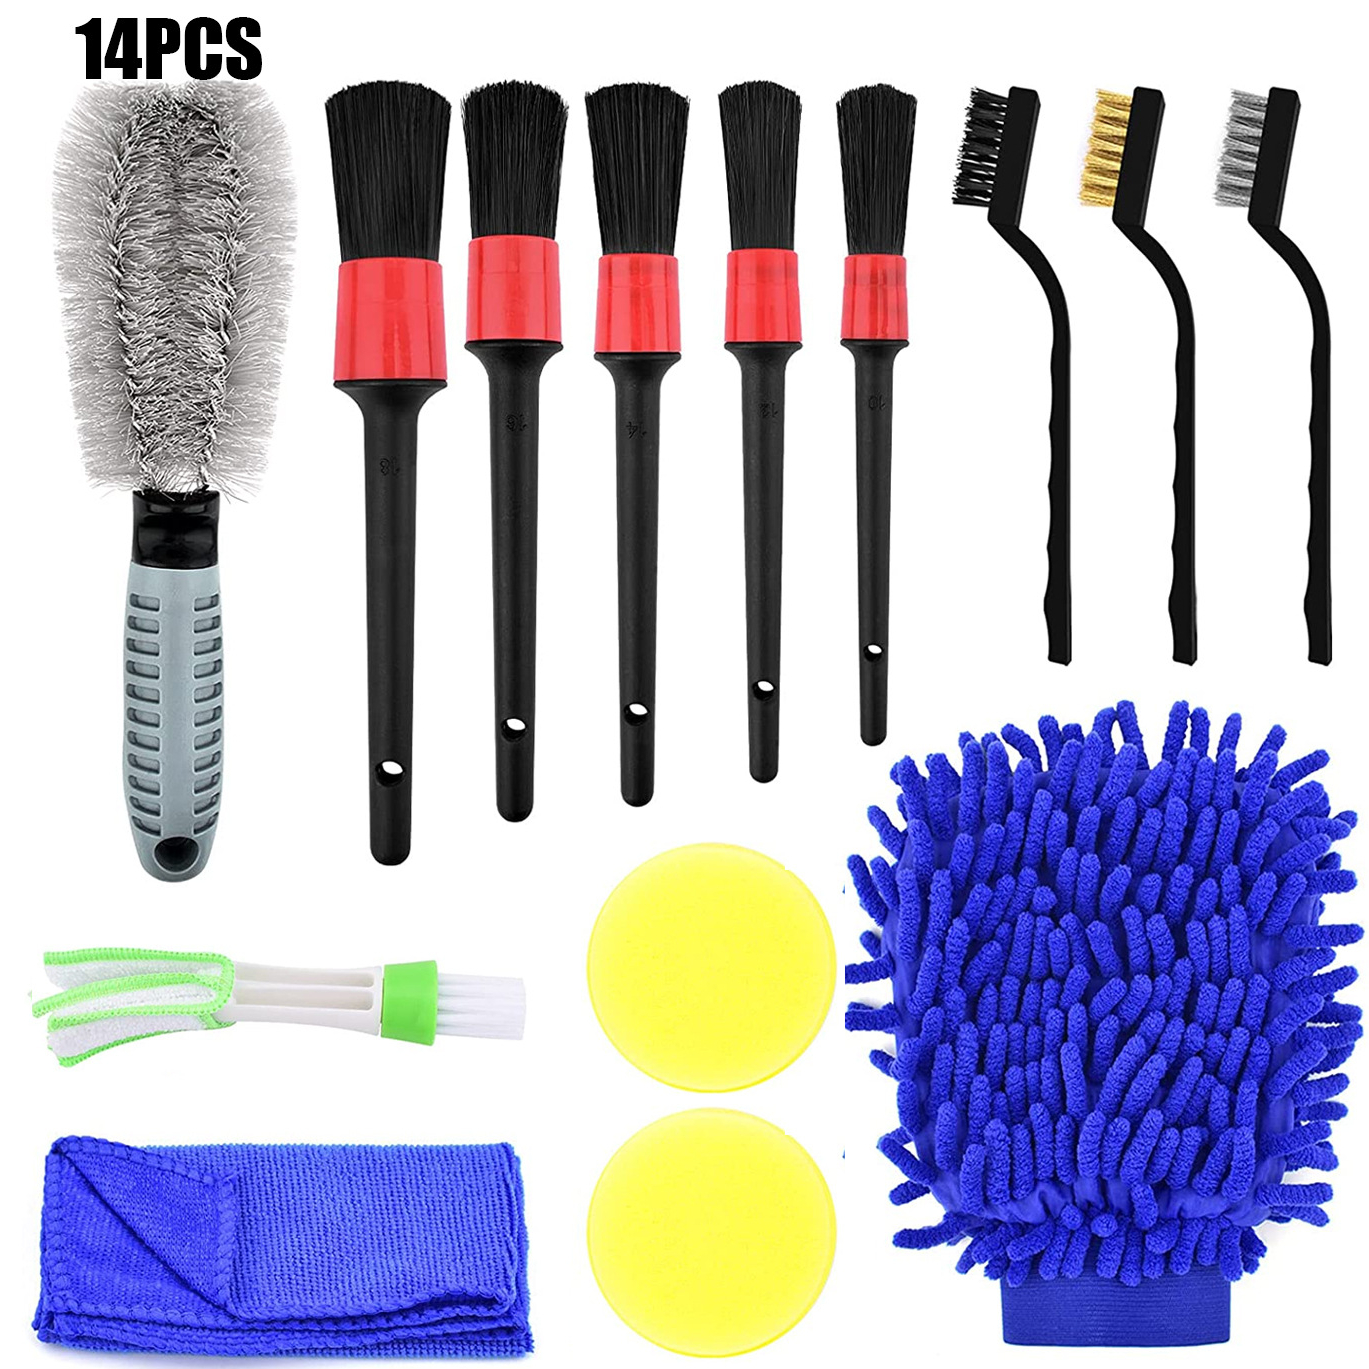 Auto Detailing Tools & Car Cleaning Accessories